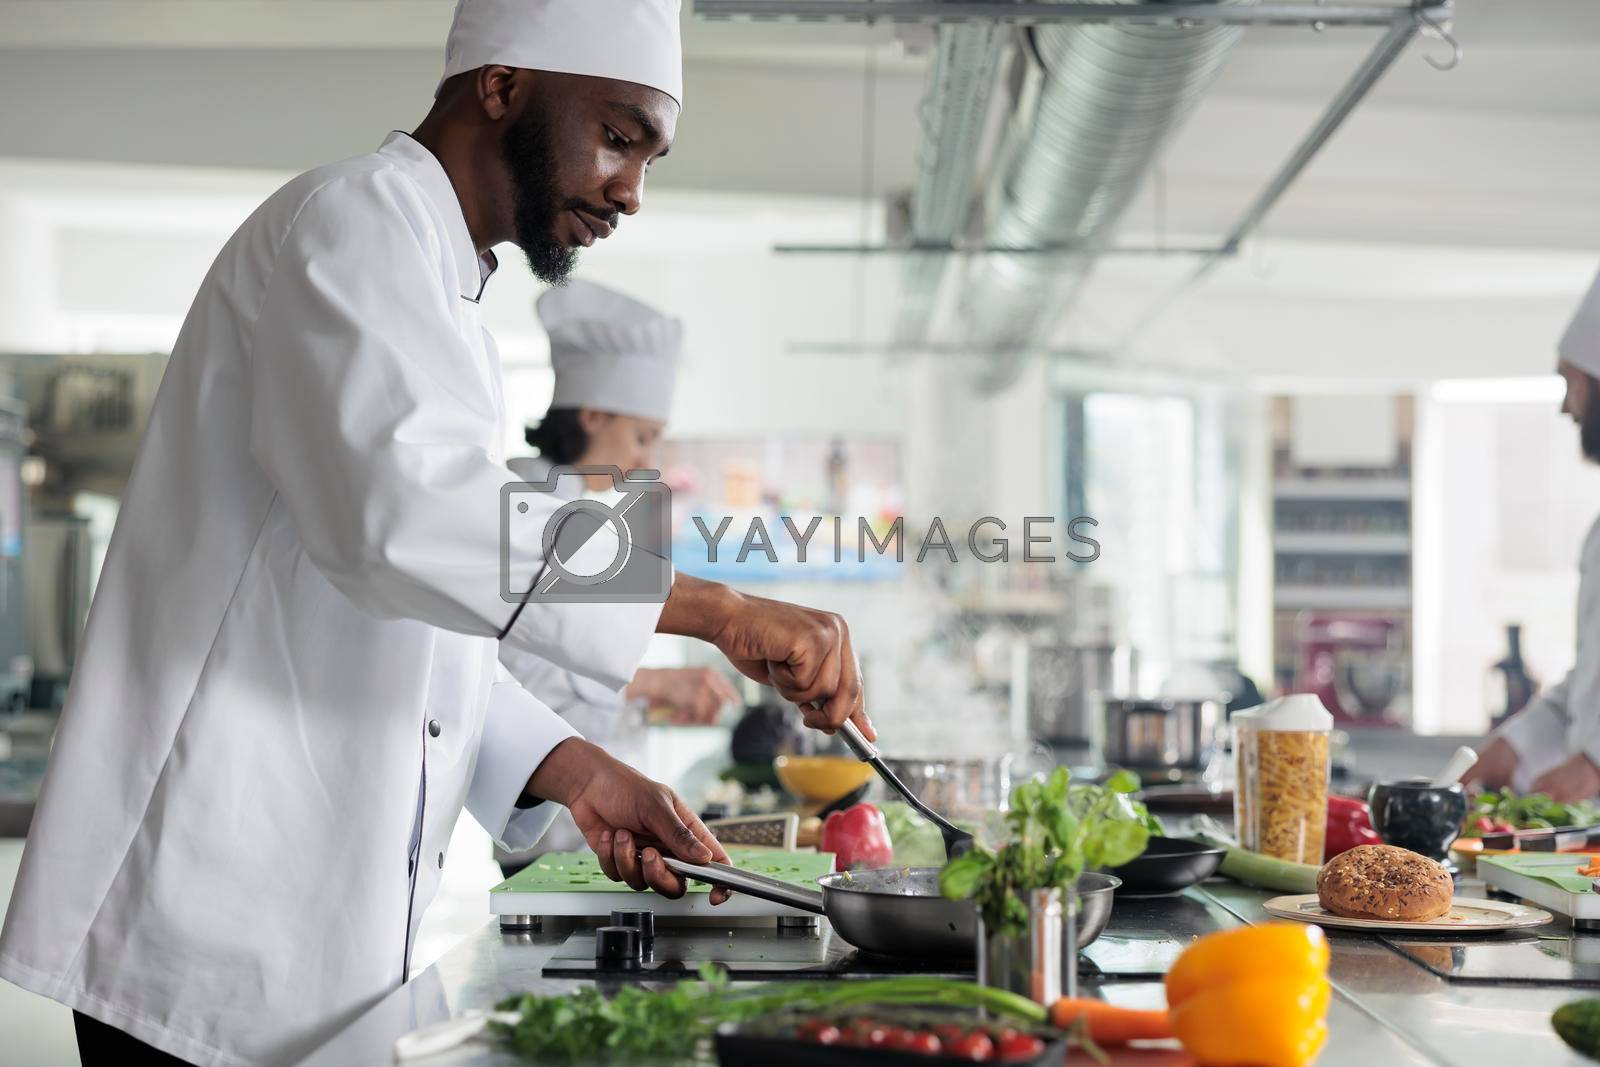 Food industry worker preparing meal in restaurant professional kitchen. Skilled head chef stirring with spatula in pan while cooking gourmet dish for dinner service, garnished with fresh herbs.